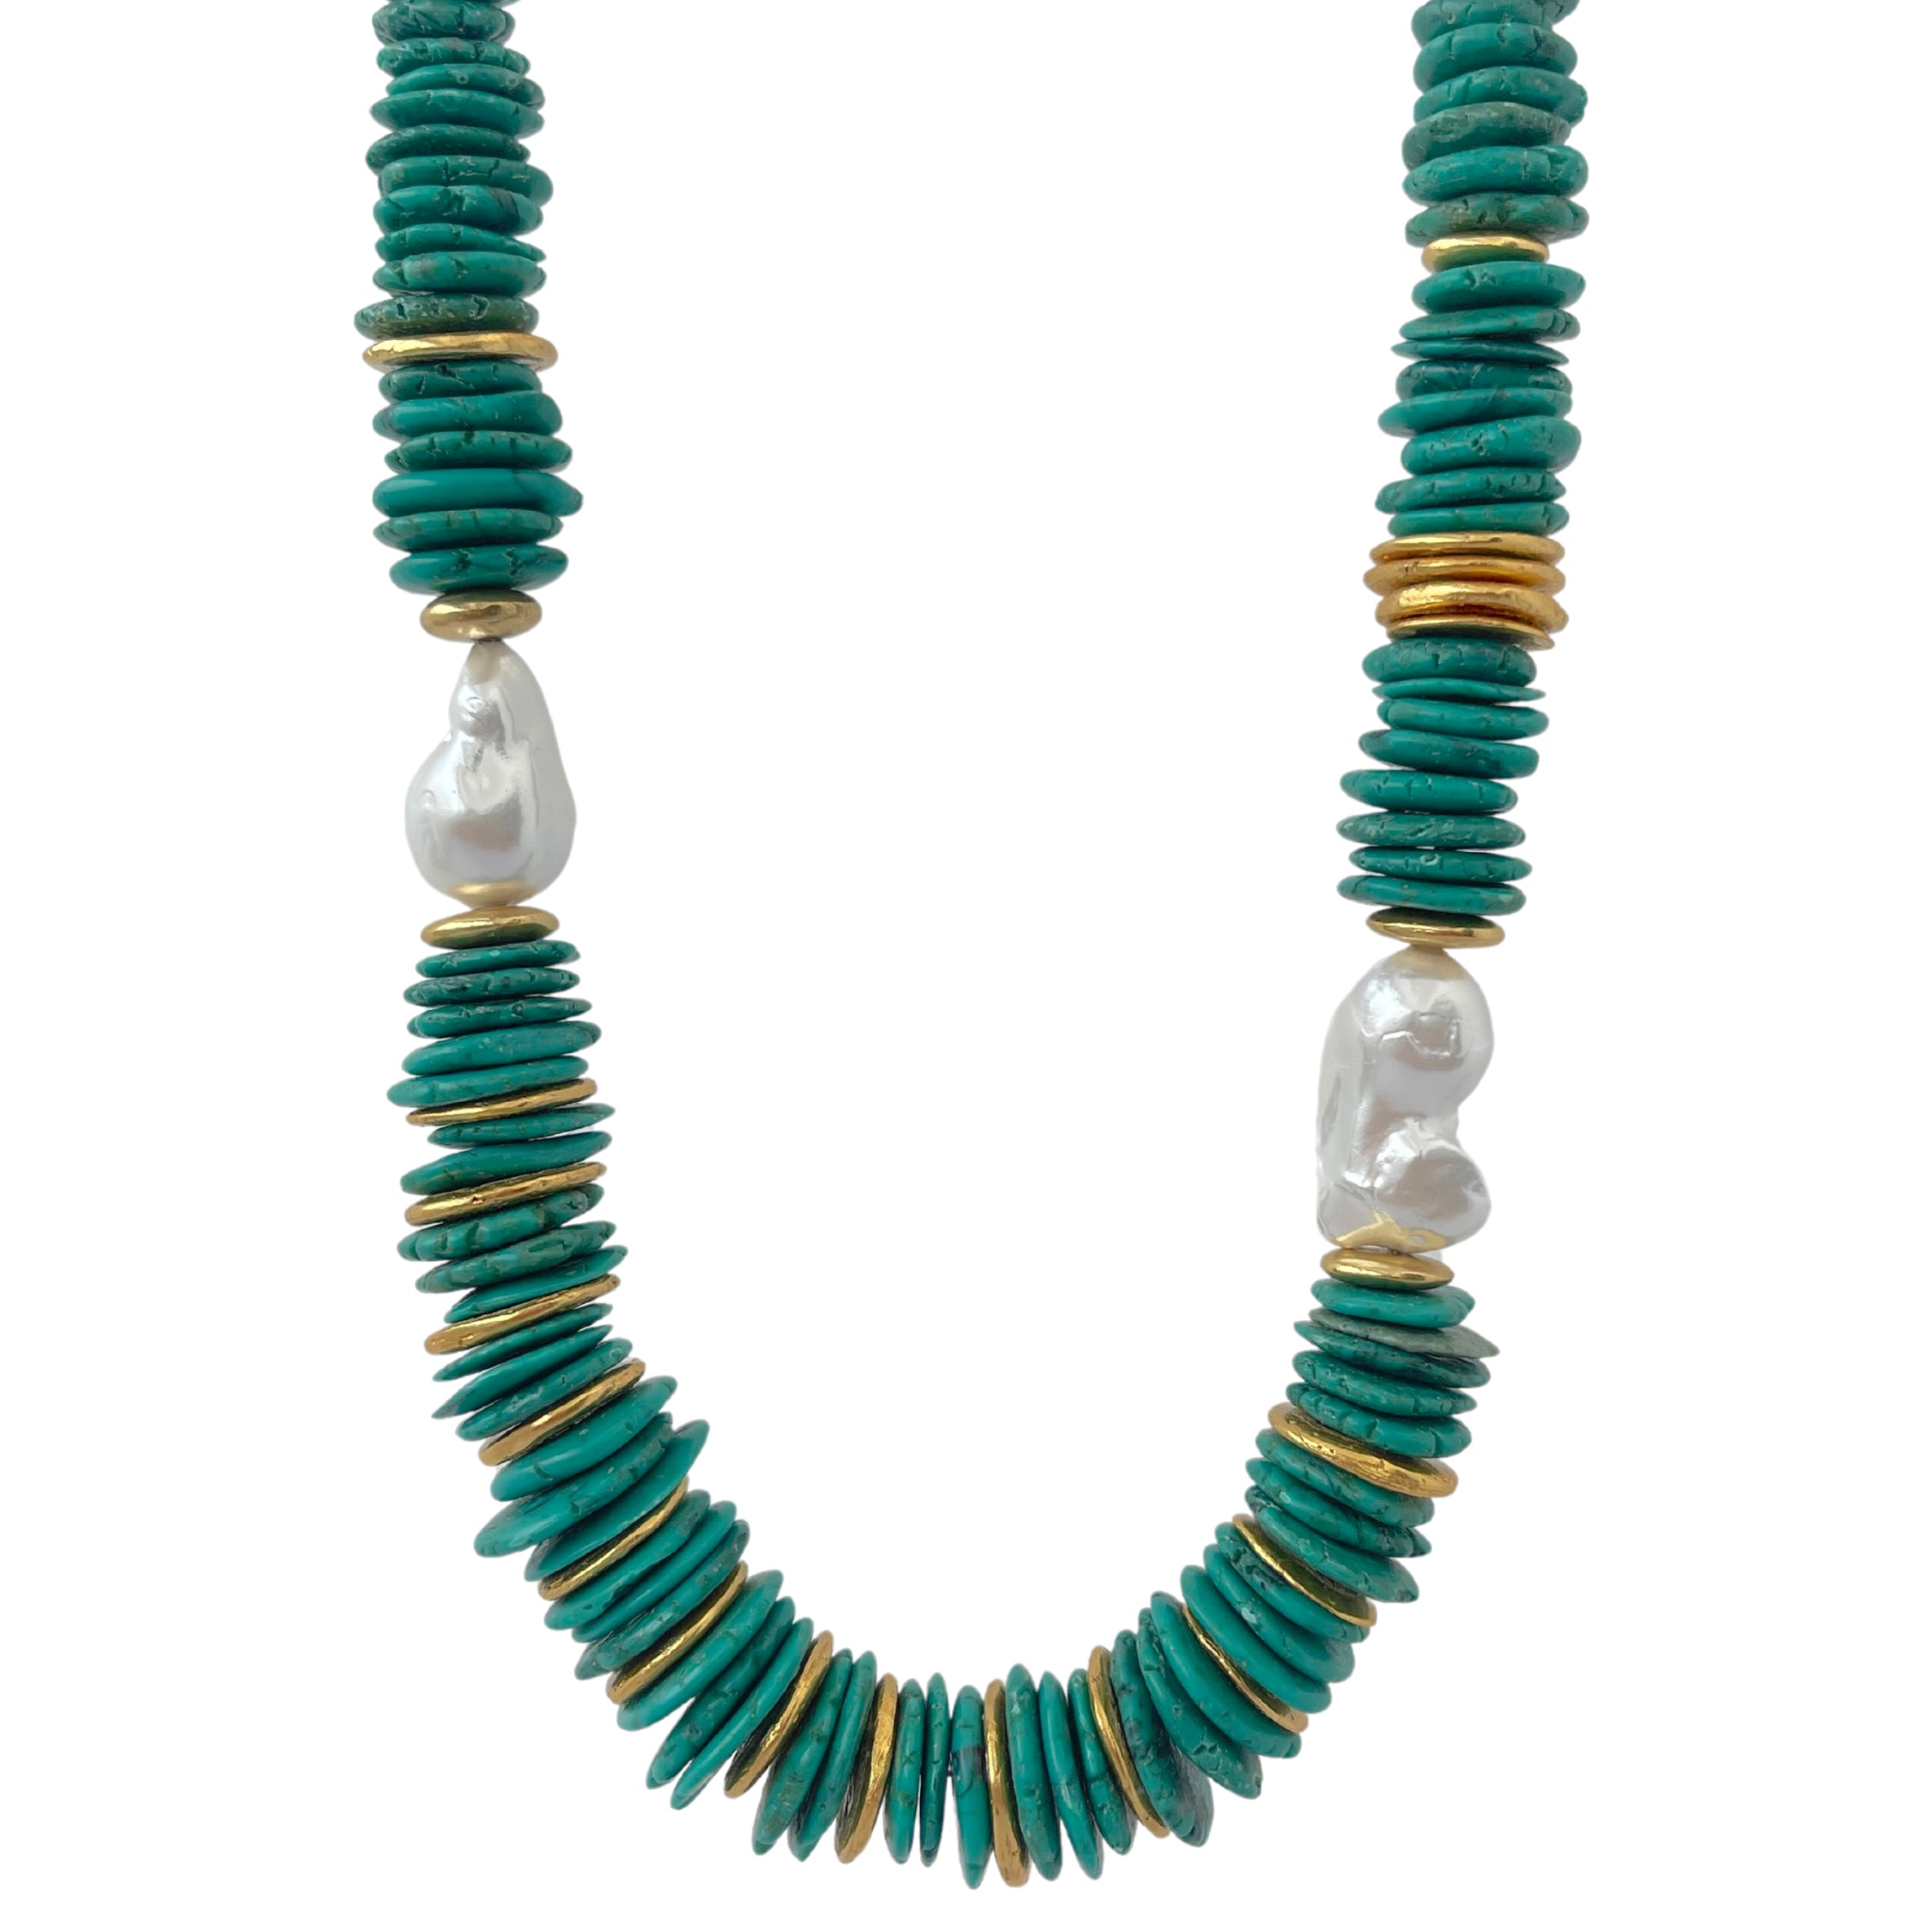 ISTANBUL CHUNKY TURQUOISE/NAVY NECKLACE